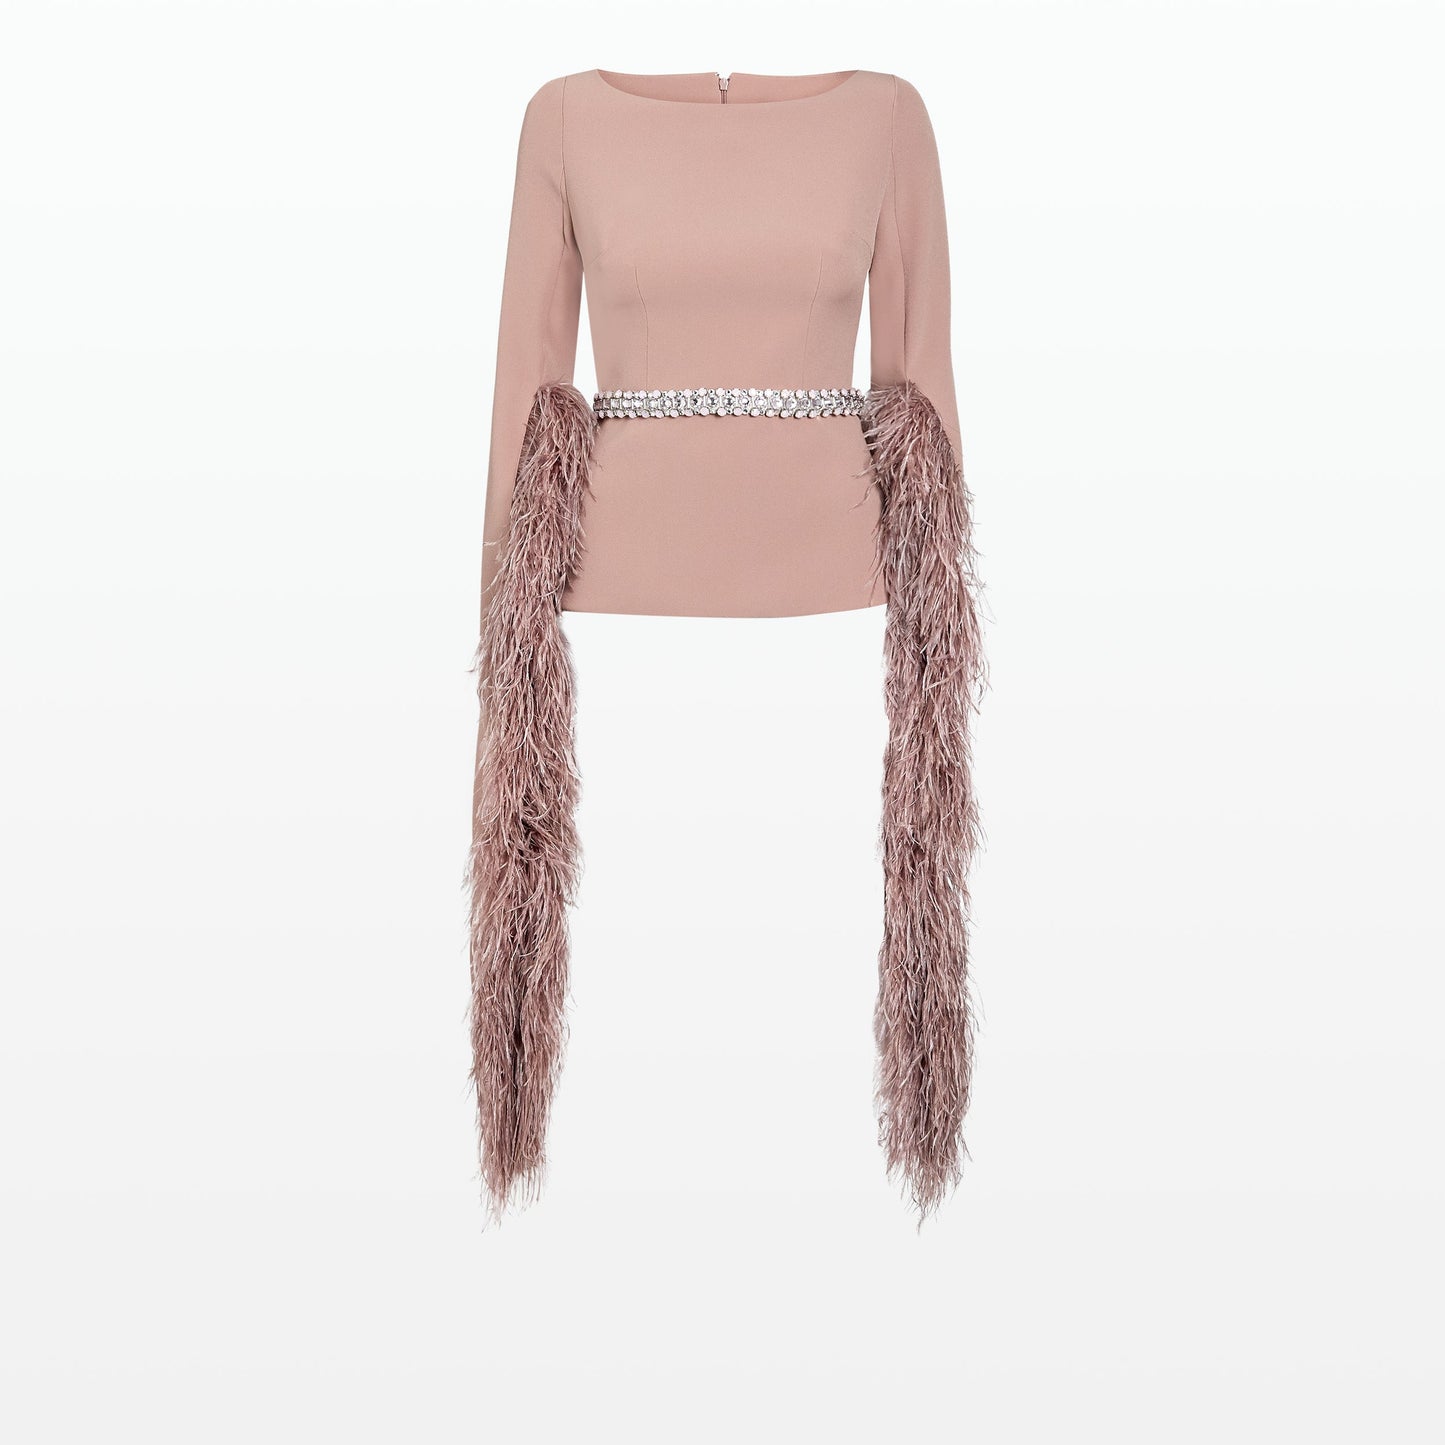 Tavia Dusty Pink Feather-Trimmed Top